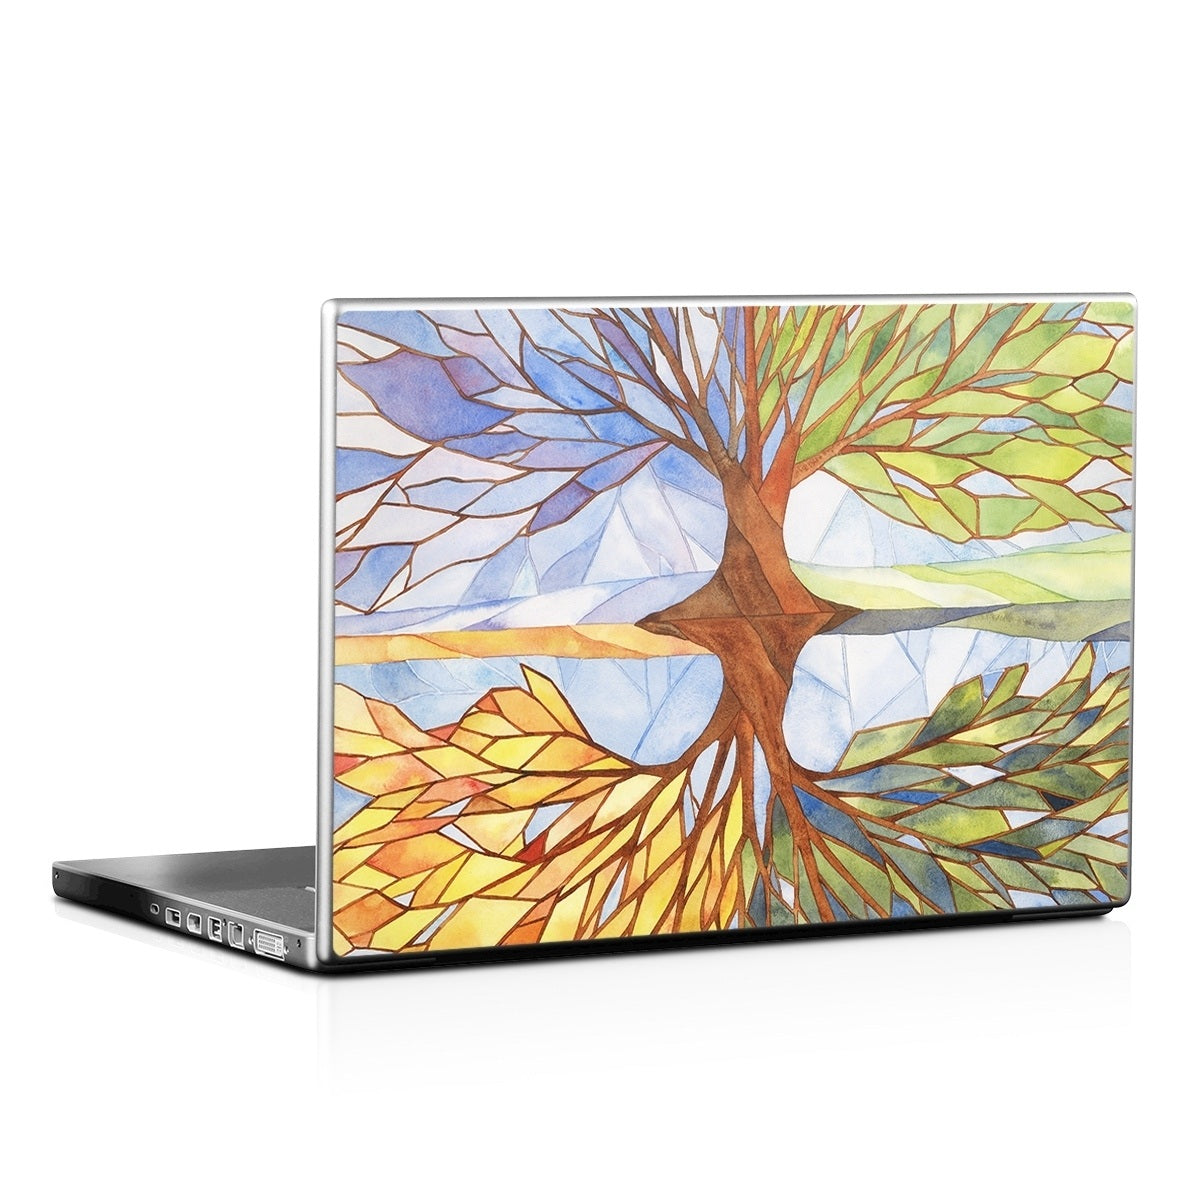 Searching for the Season - Laptop Lid Skin